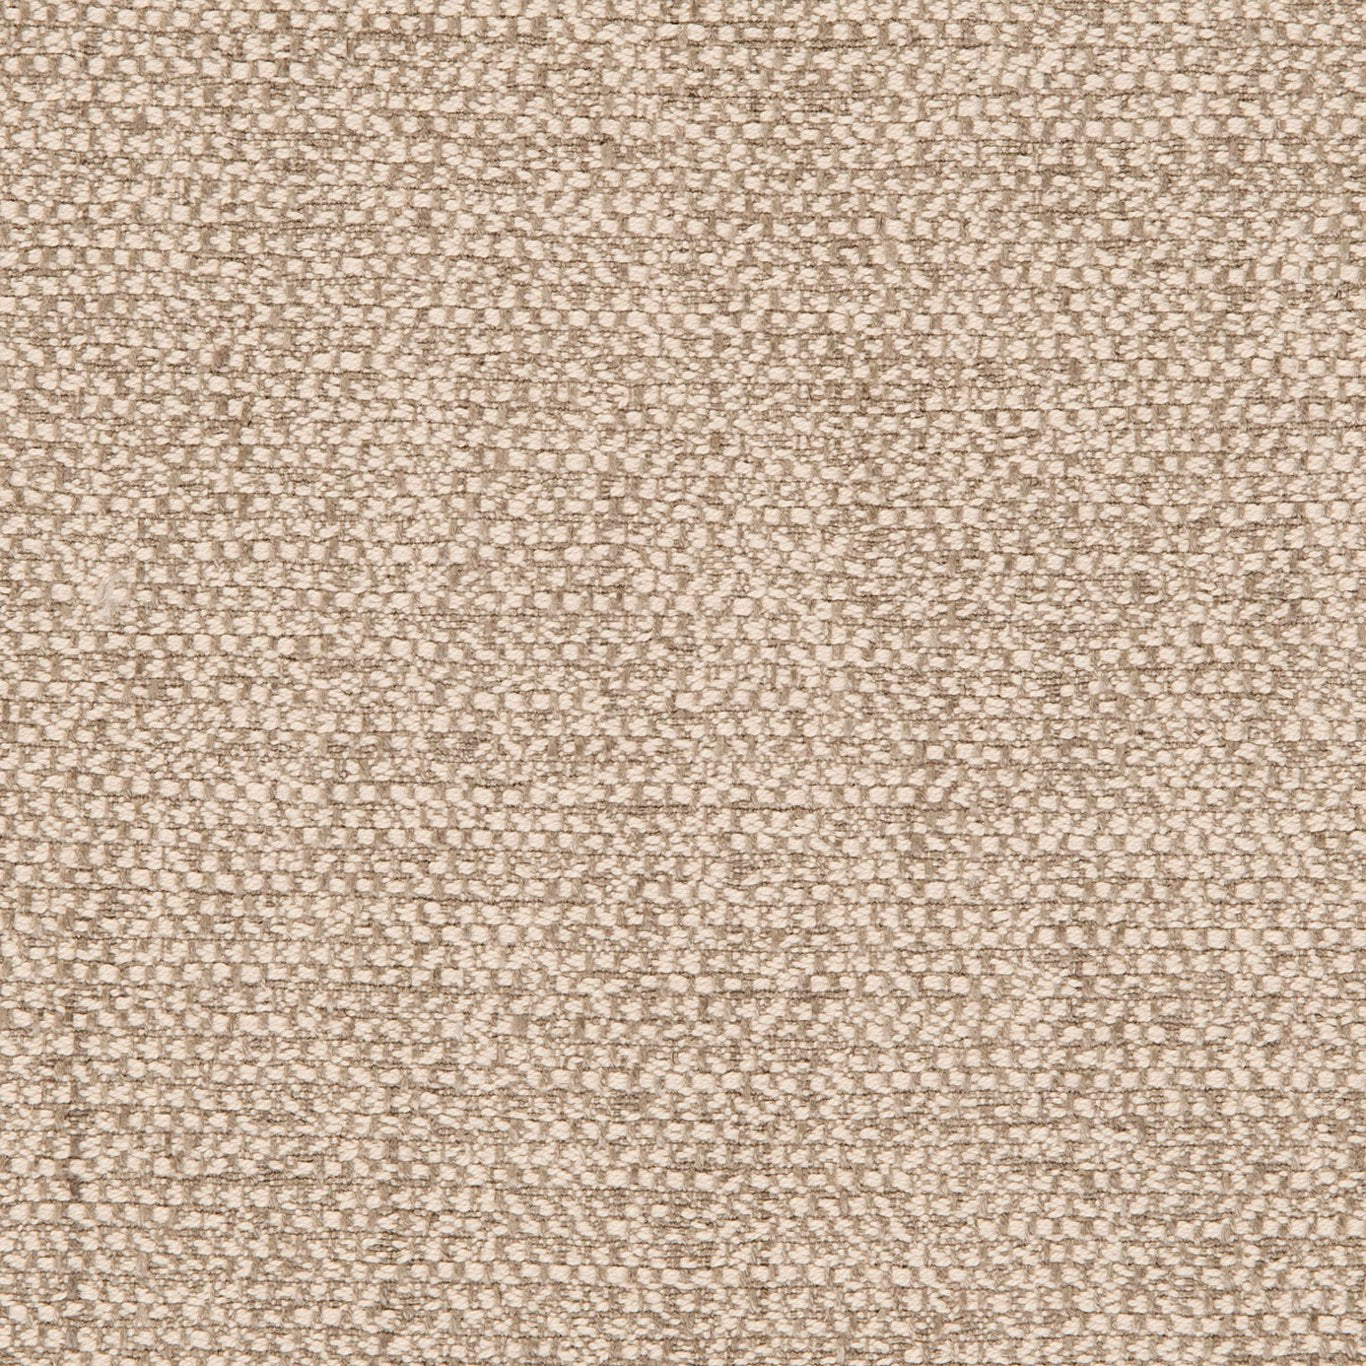 Angus Fabric by Clarke & Clarke - F0581/05 - Taupe